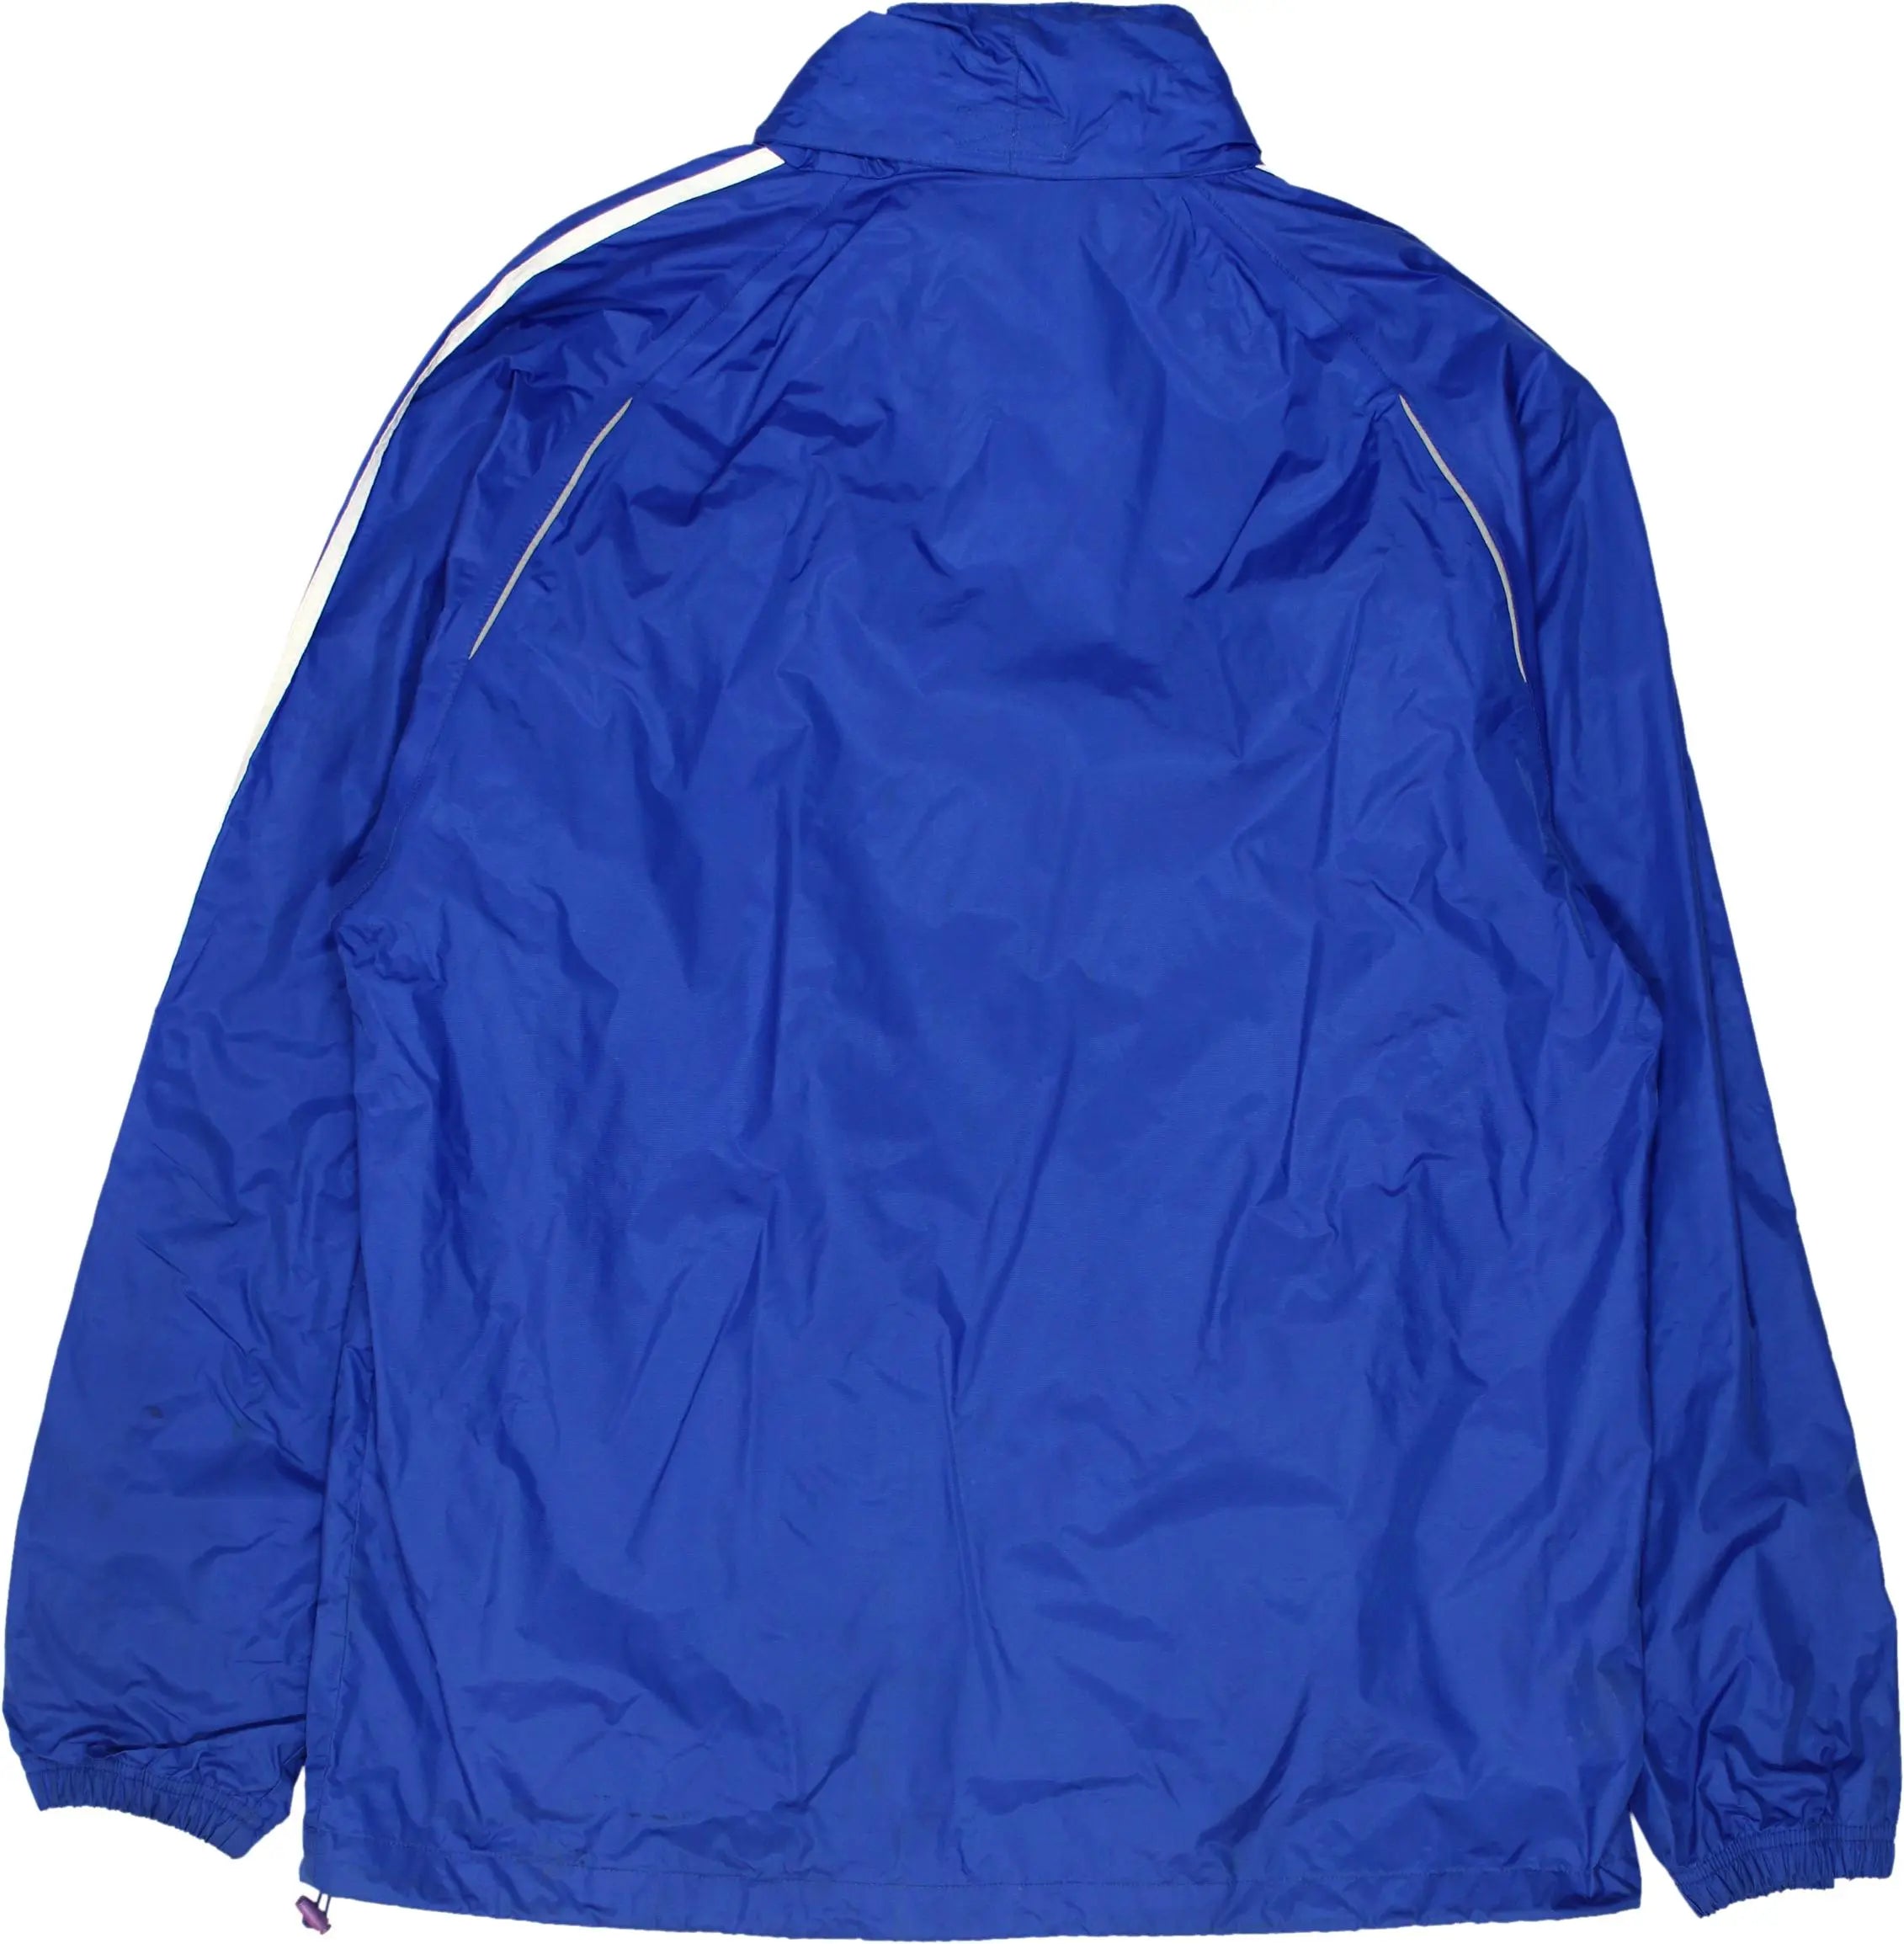 Adidas - Raincoat- ThriftTale.com - Vintage and second handclothing